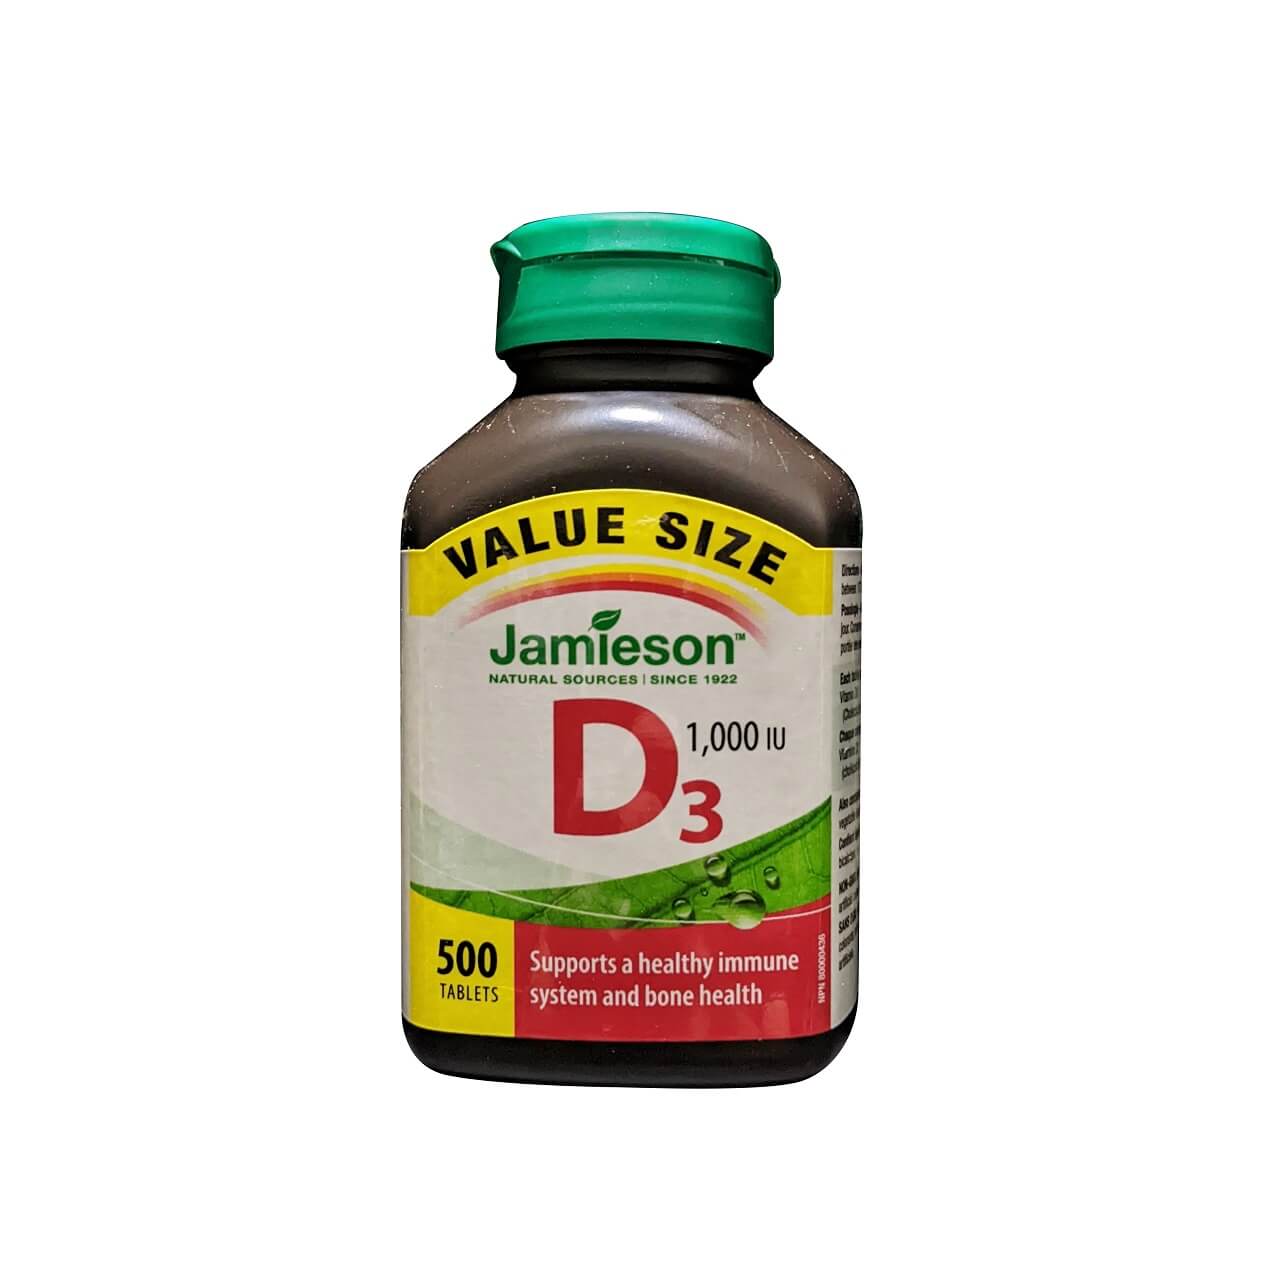 Product label for Jamieson Vitamin D3 1000 IU (500 tablets) in English